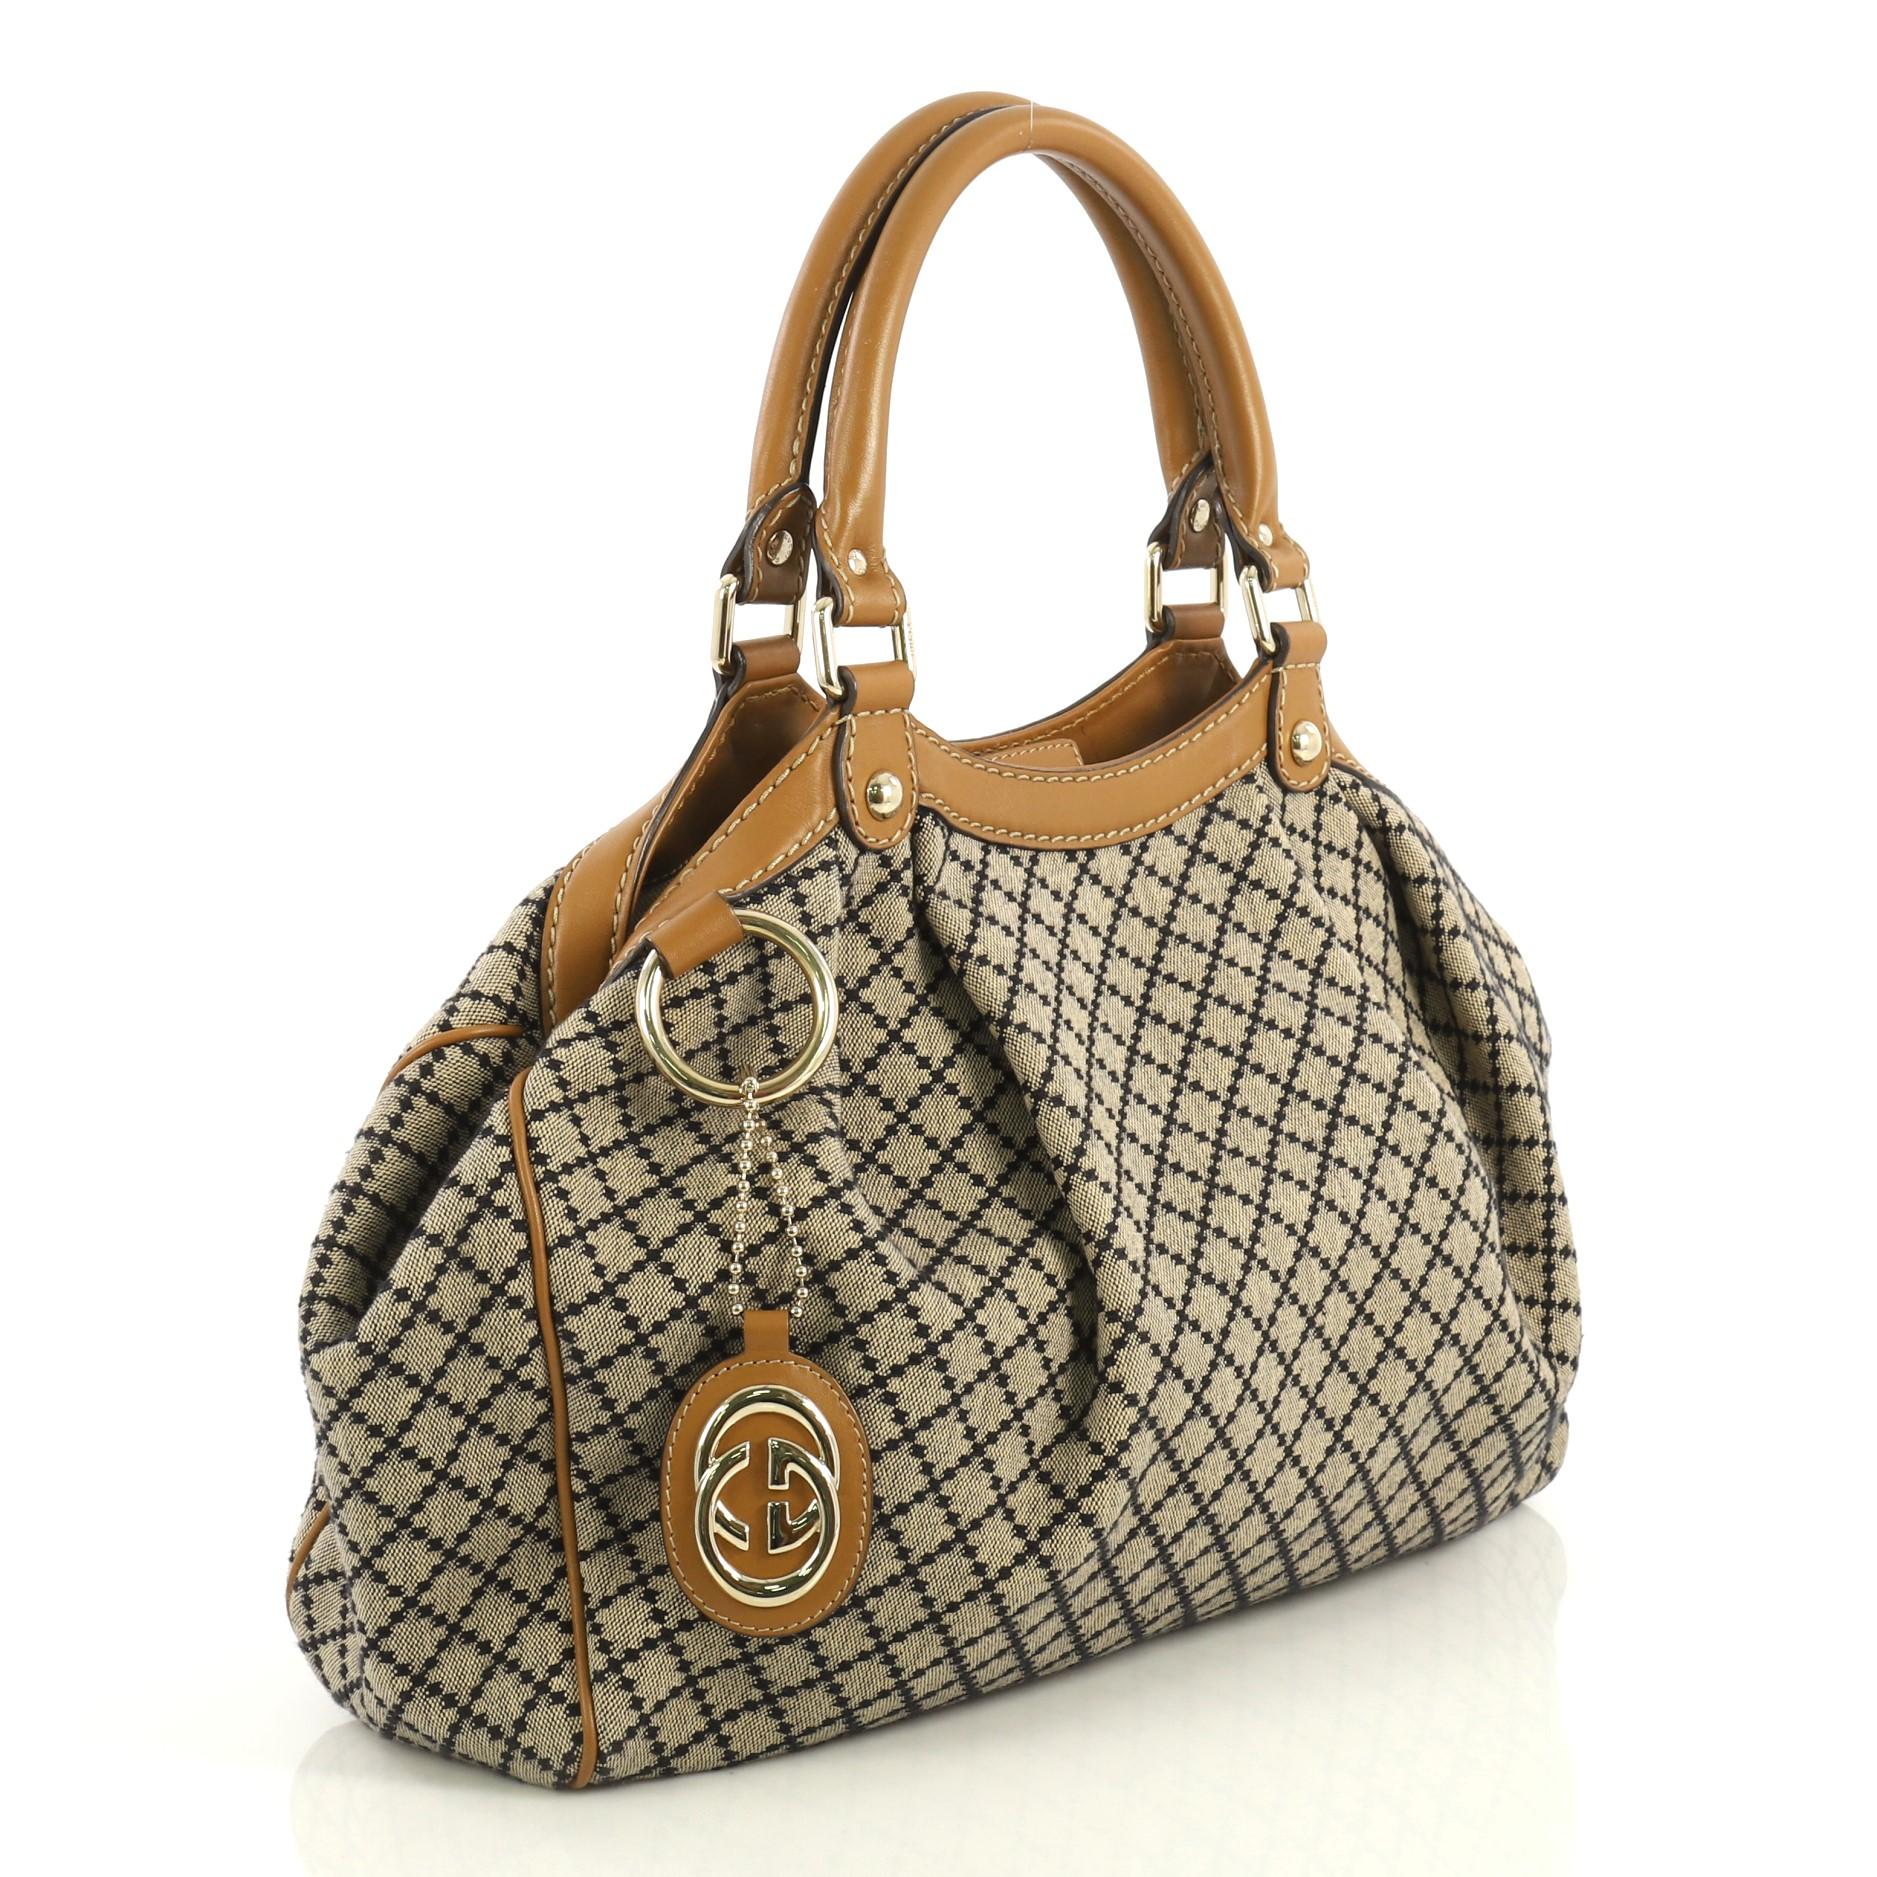 This Gucci Sukey Tote Diamante Coated Canvas Medium, crafted in brown diamante coated canvas, features dual rolled handles, pleated details, side snap buttons and gold-tone hardware. Its magnetic snap closure opens to a neutral fabric interior with